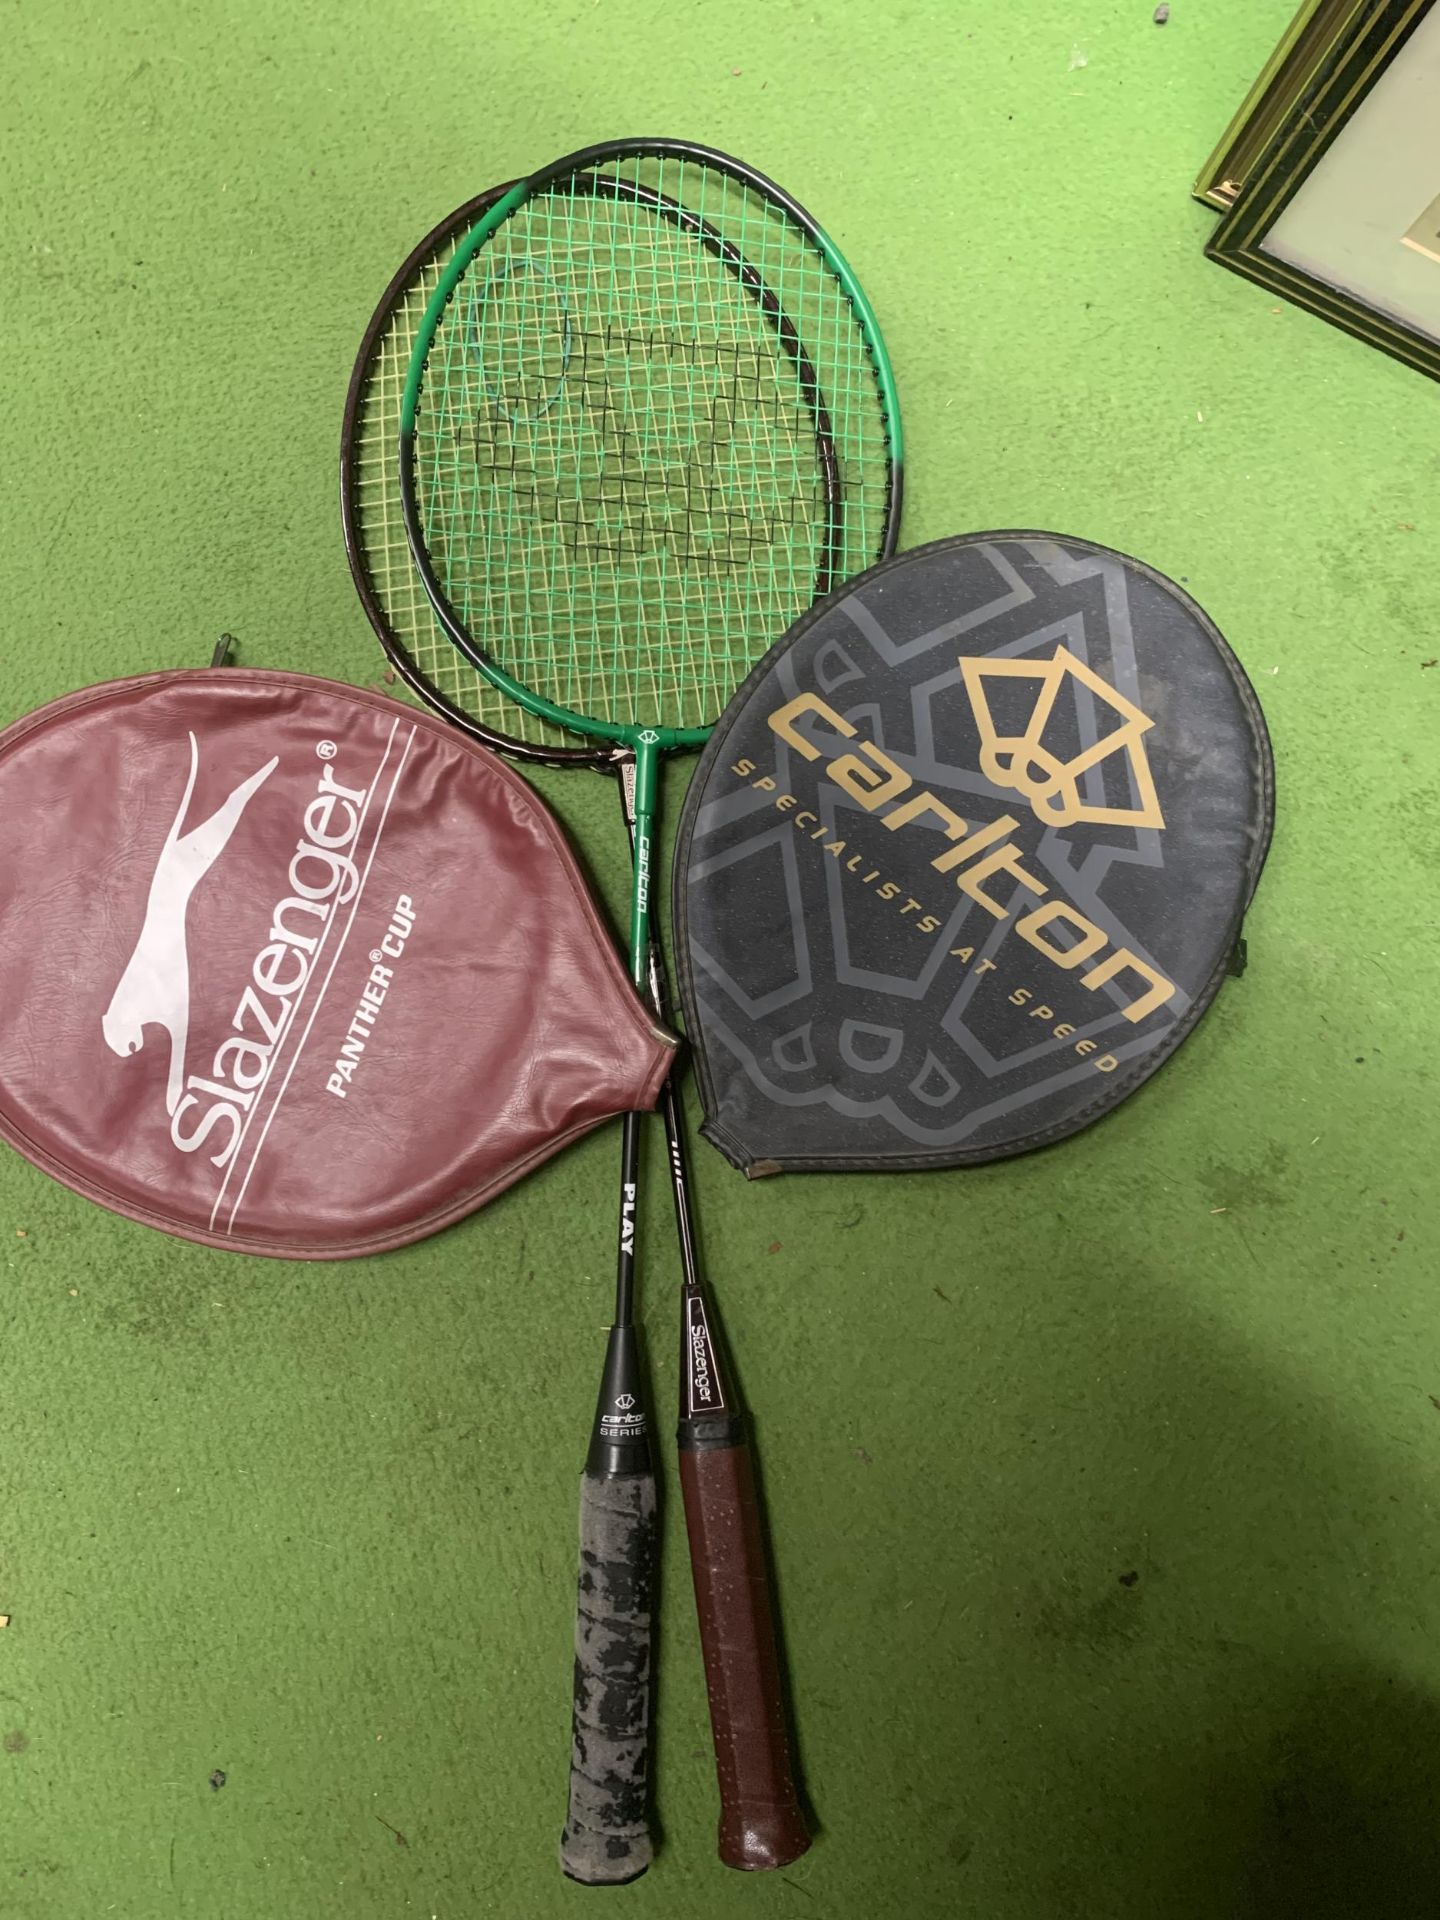 TWO BADMINTON RAQUETS WITH COVERS